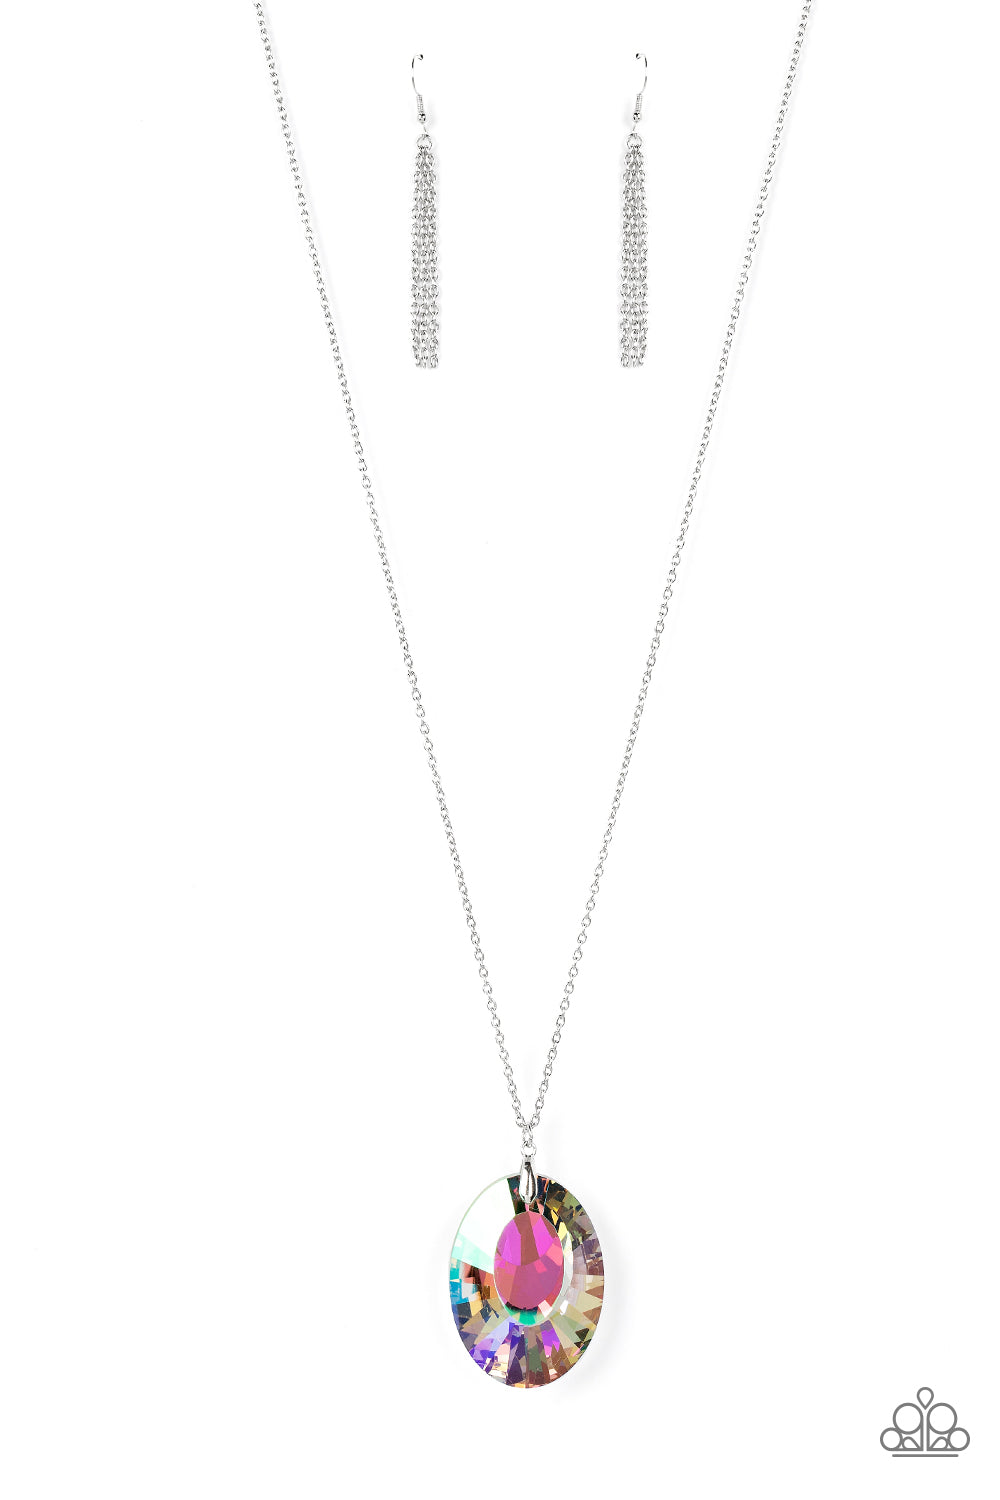 Paparazzi Accessories Celestial Essence - Multi Iridescent Convention Necklaces featuring a reflective focal point and an exaggerated faceted surface, a dramatically oversized, iridescent gem sparkles at the bottom of a lengthened silver chain for an out-of-this-world kind of dazzle. Features an adjustable clasp closure. Due to its prismatic palette, color may vary.  Sold as one individual necklace. Includes one pair of matching earrings.  2022 Glow Convention 